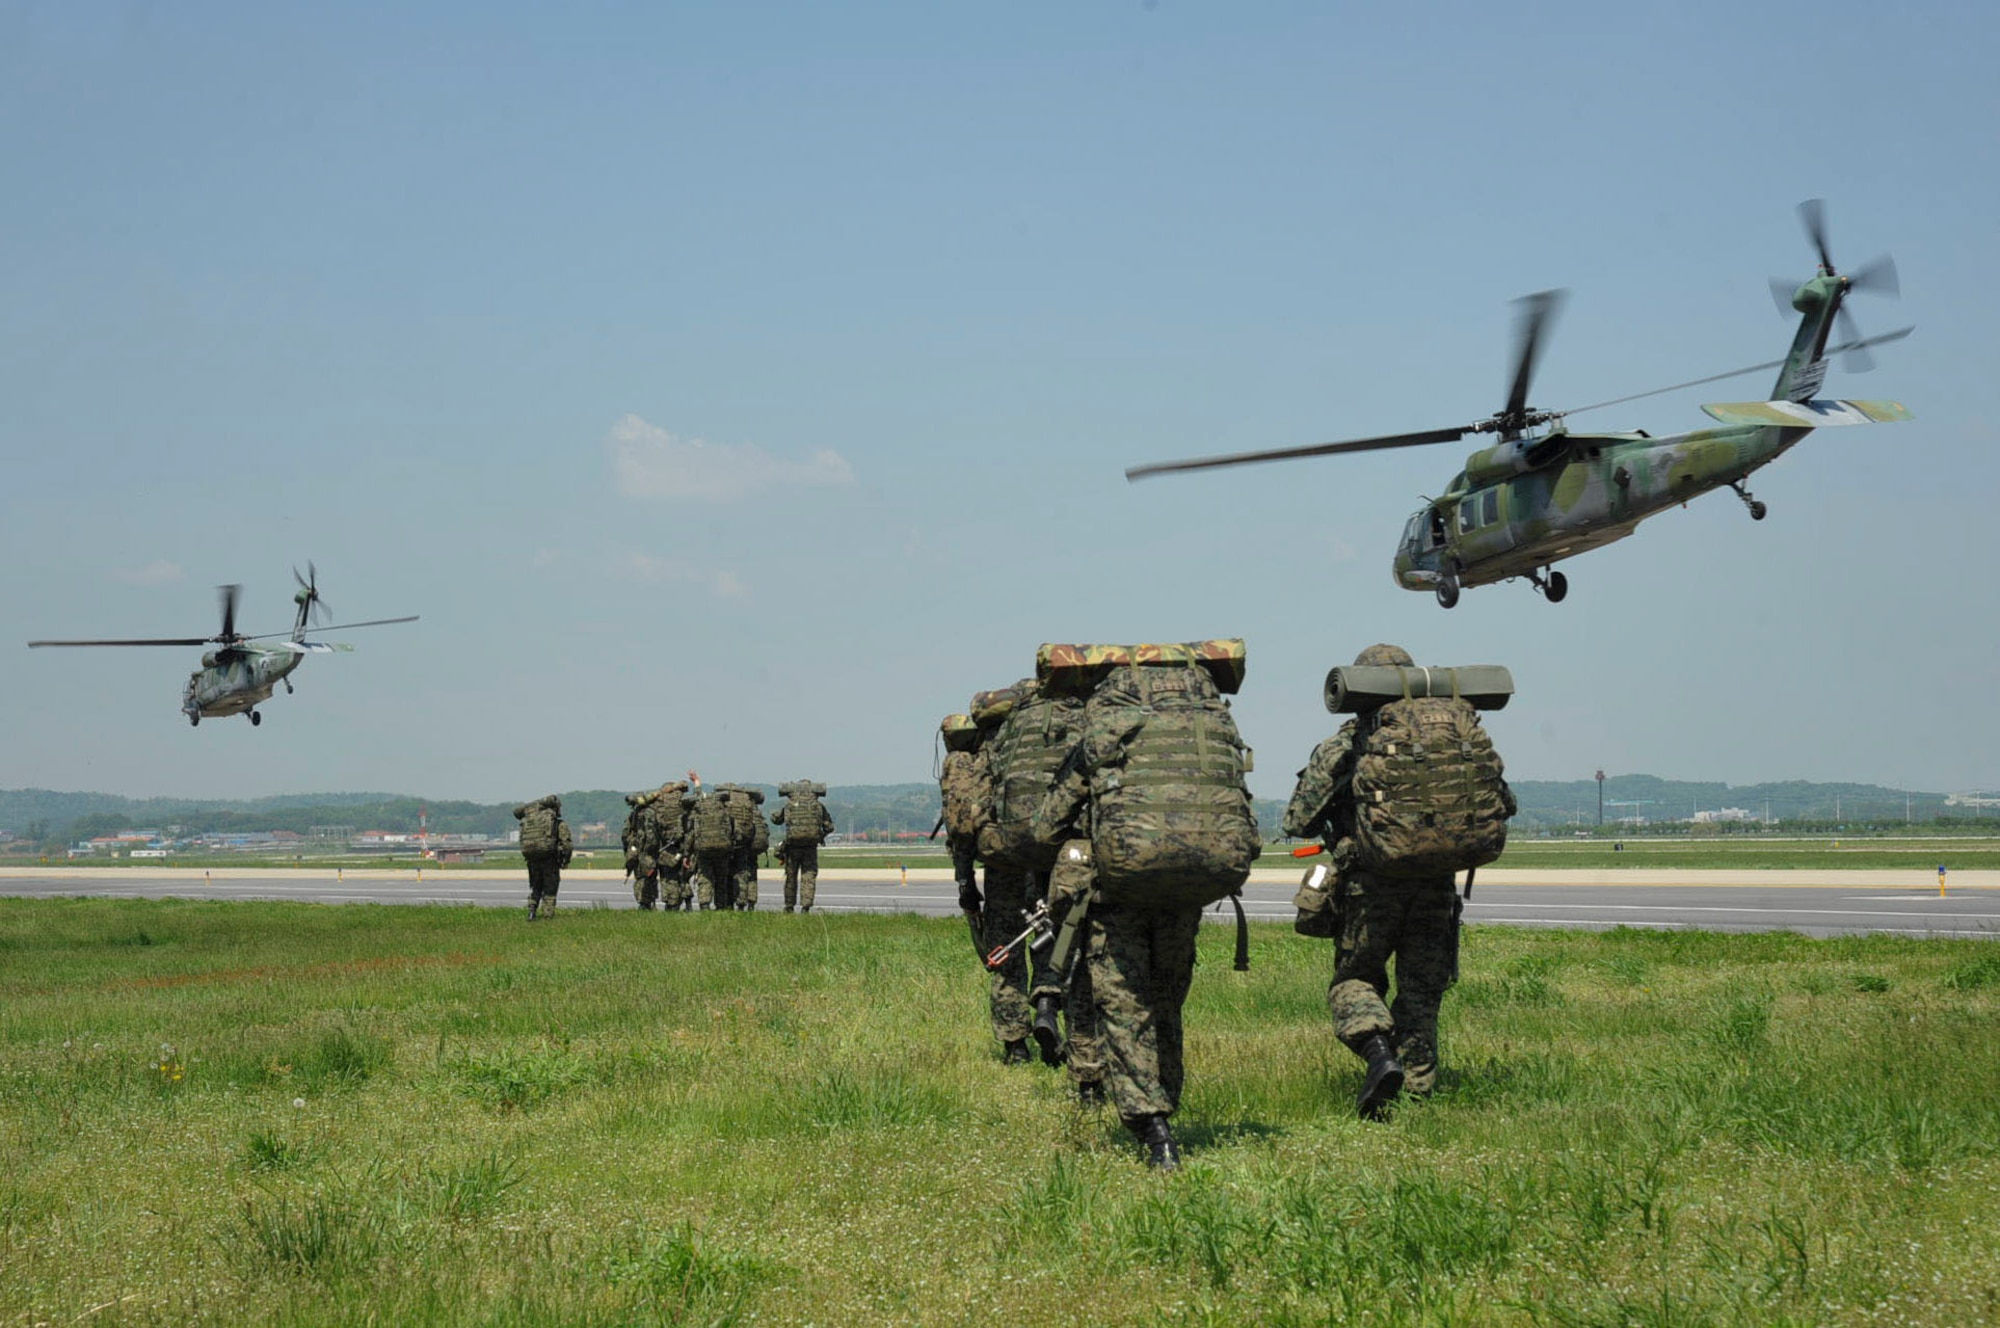 Republic of Korea army special operations forces members ruck march after stepping off of HH-60P Pave Hawks for Exercise Beverly Herd 16-01 May 11, 2016, at Osan Air Base, Republic of Korea. The SOF members trained with the 51st Security Forces Squadron on opposing forces scenarios. (U.S. Air Force photo by Staff Sgt. Jonathan Steffen/Released)